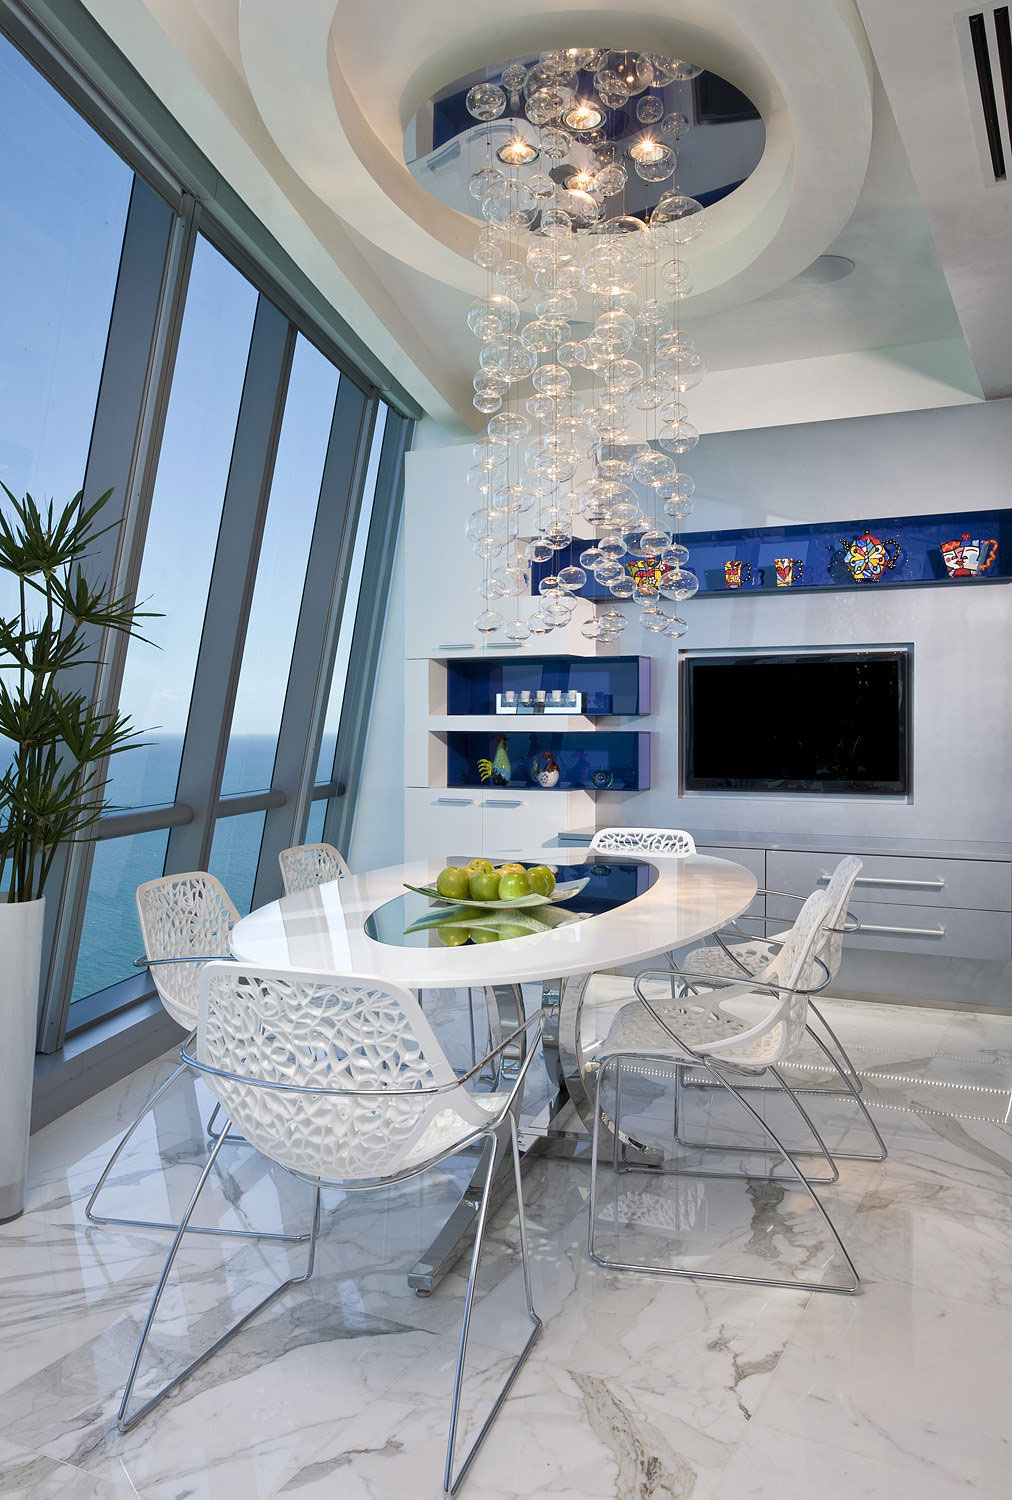 Elegant-ocean-penthouse-with-lots-hanging-lights-5 Elegant-ocean-penthouse with lots-hanging-lights